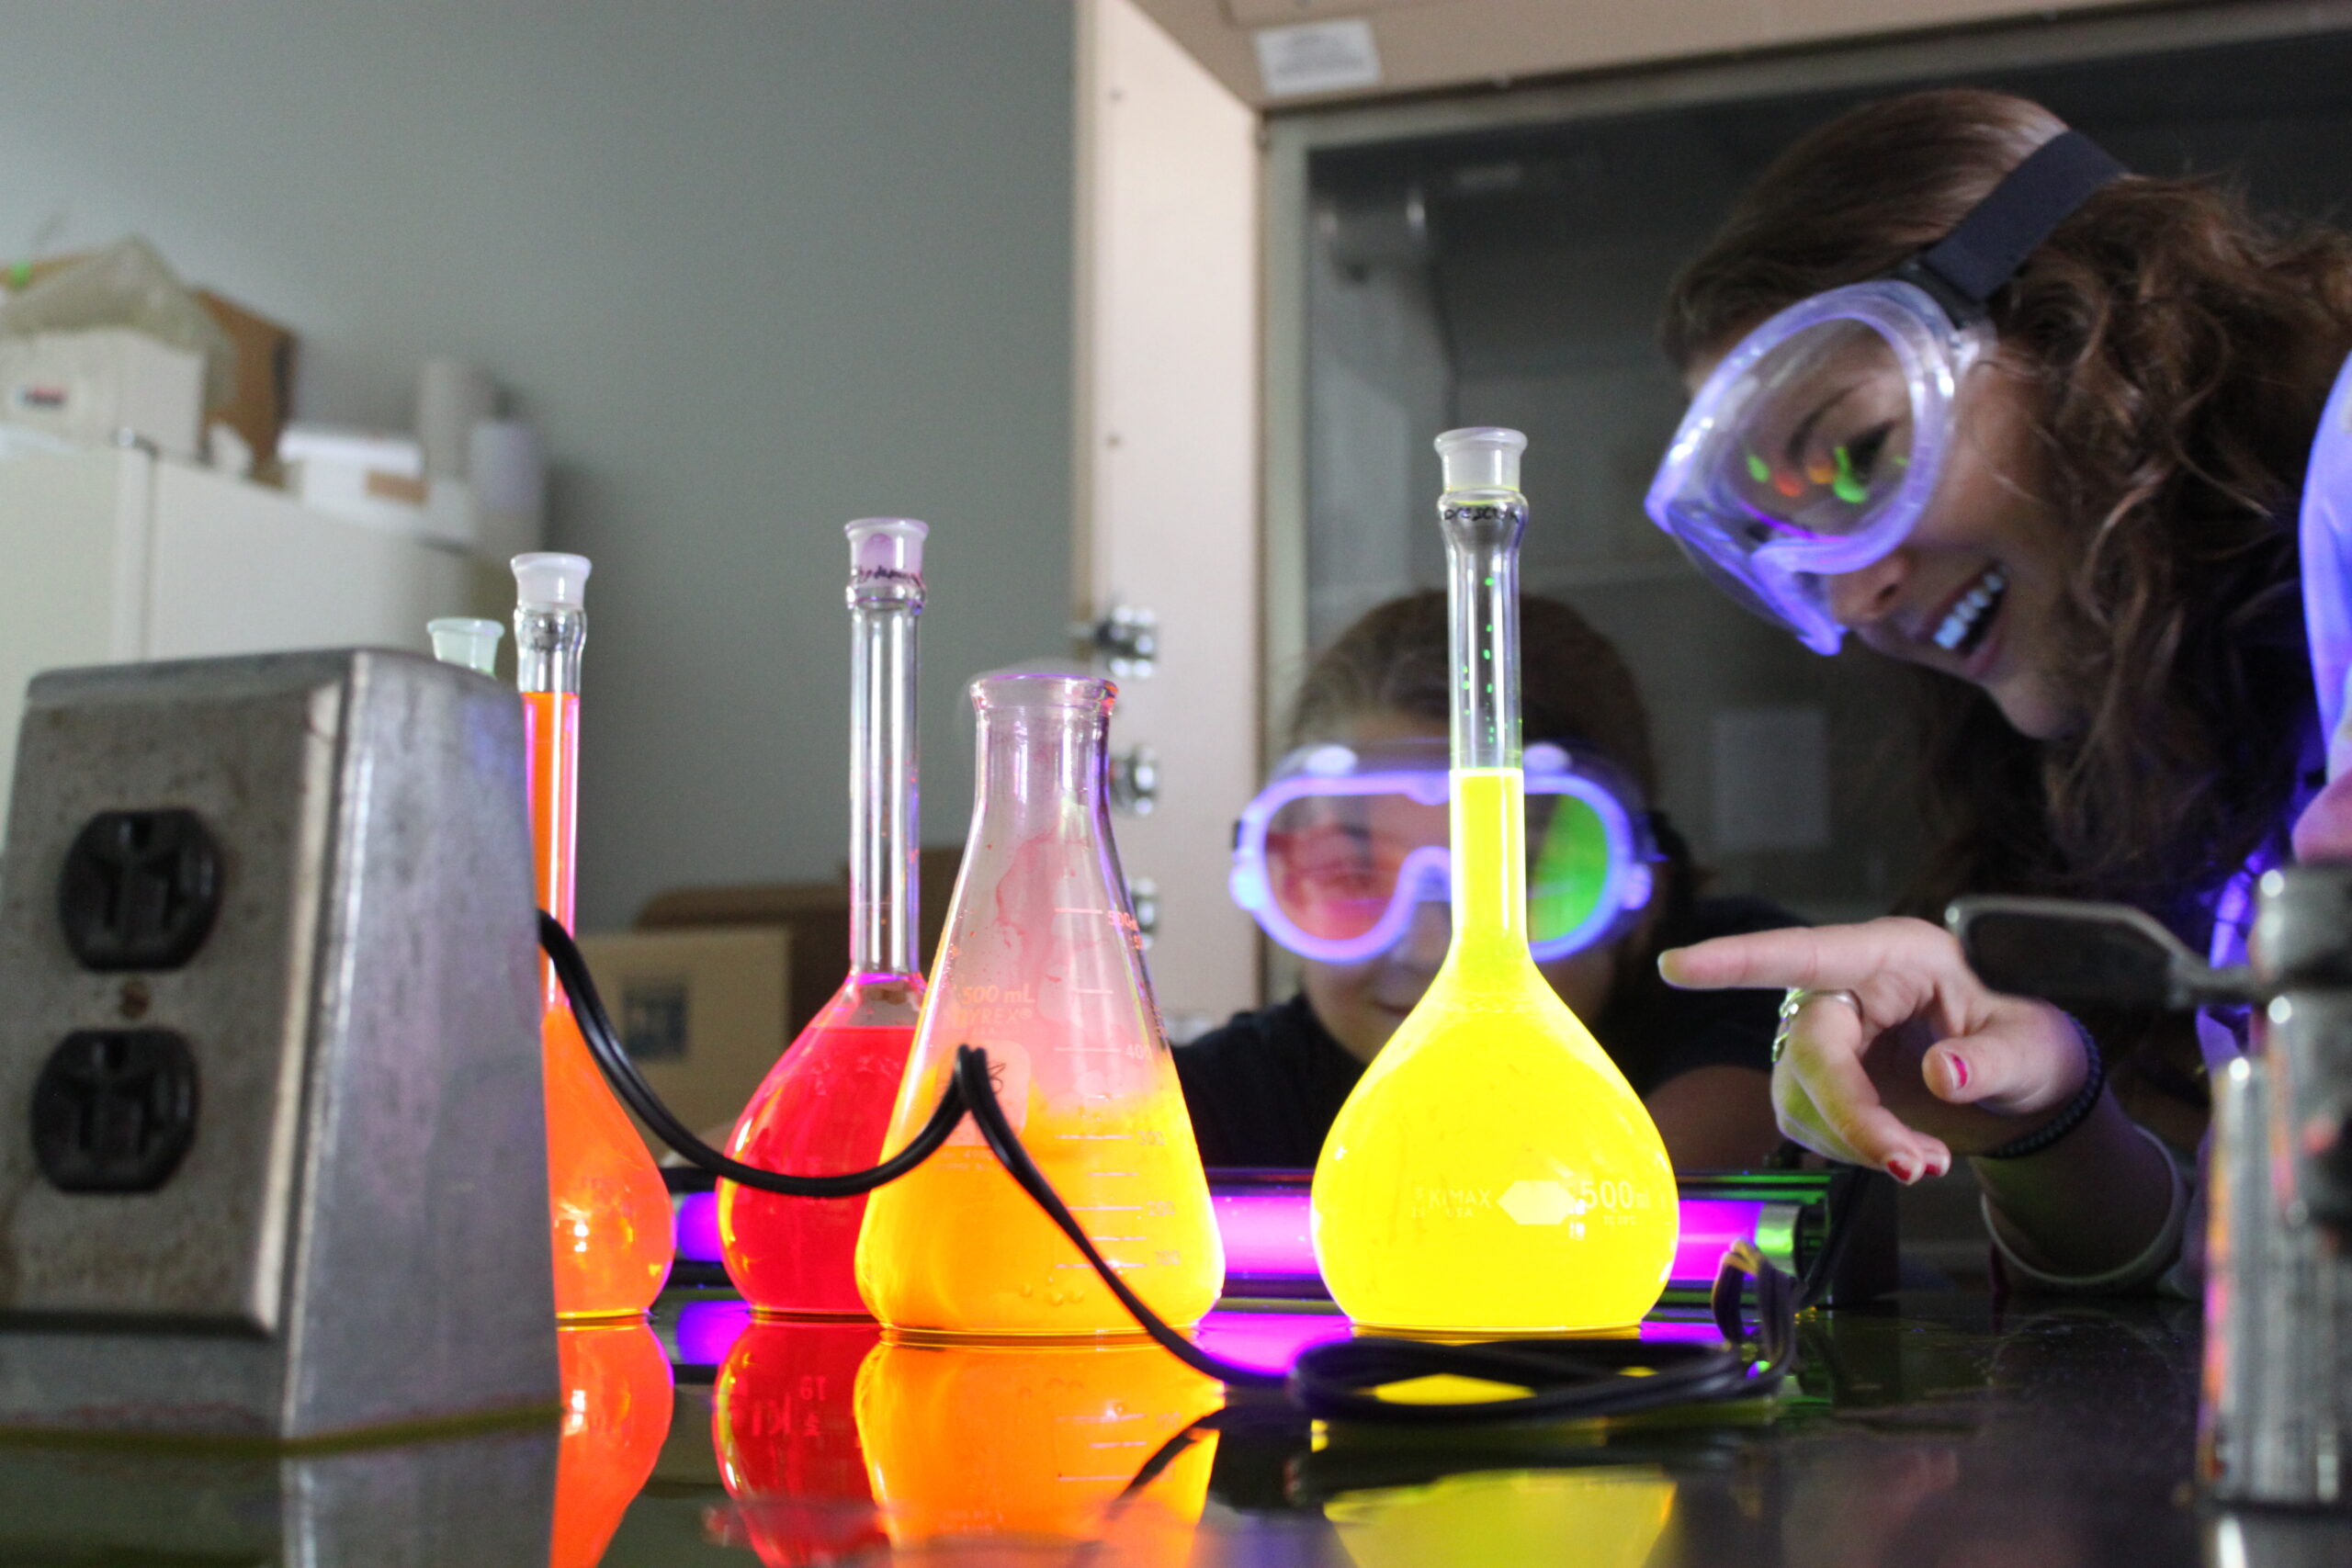 Chemistry student observes beakers with bright liquids